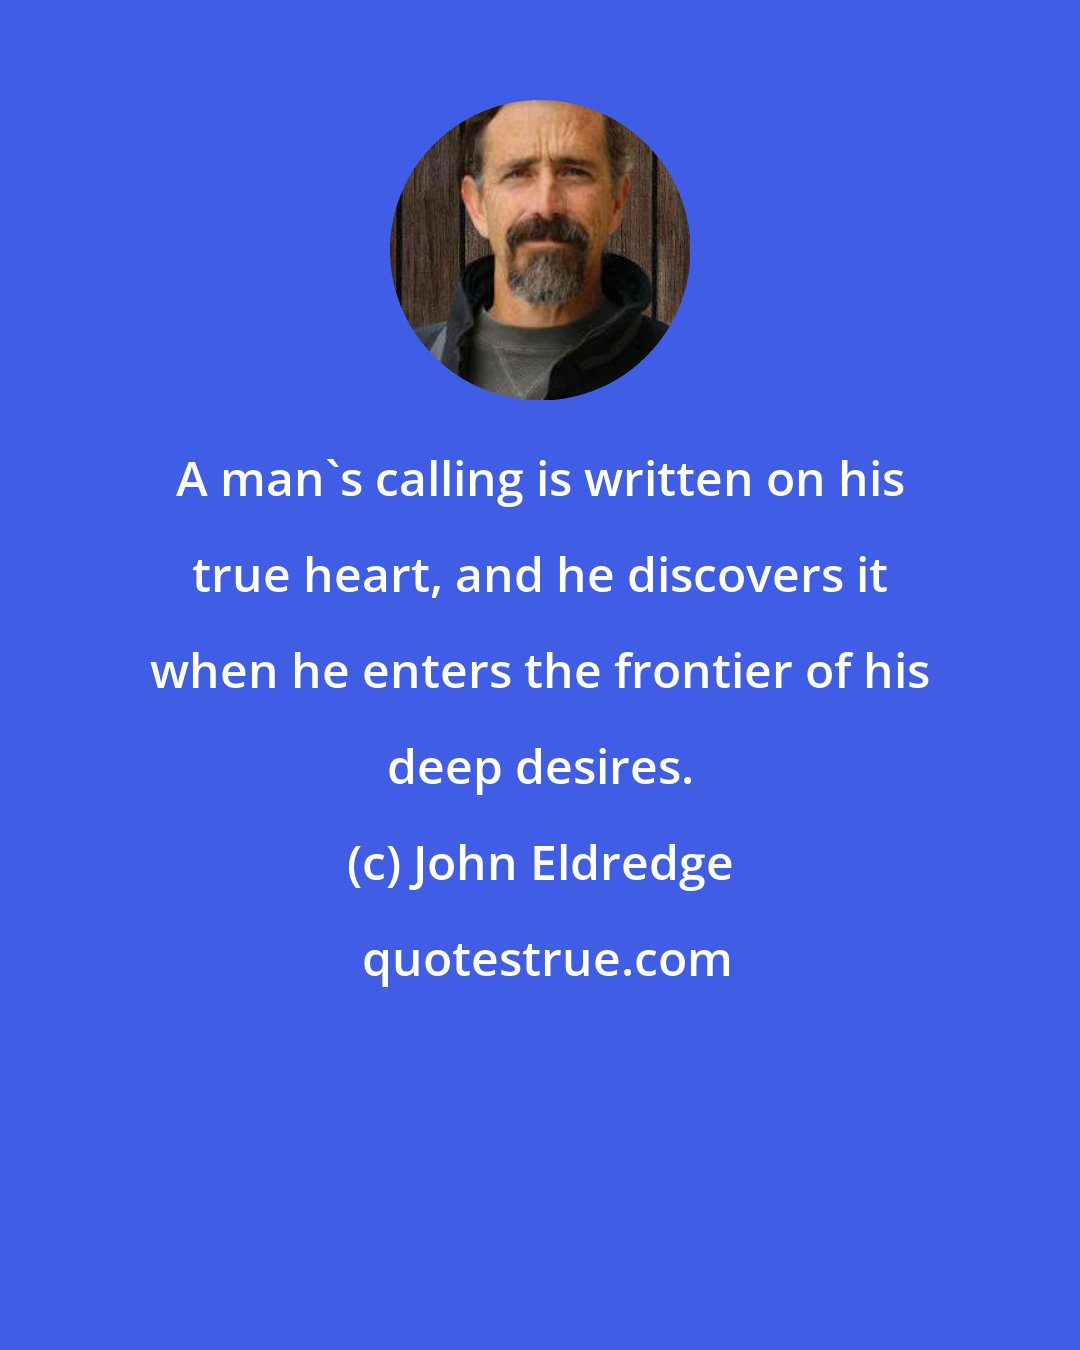 John Eldredge: A man's calling is written on his true heart, and he discovers it when he enters the frontier of his deep desires.